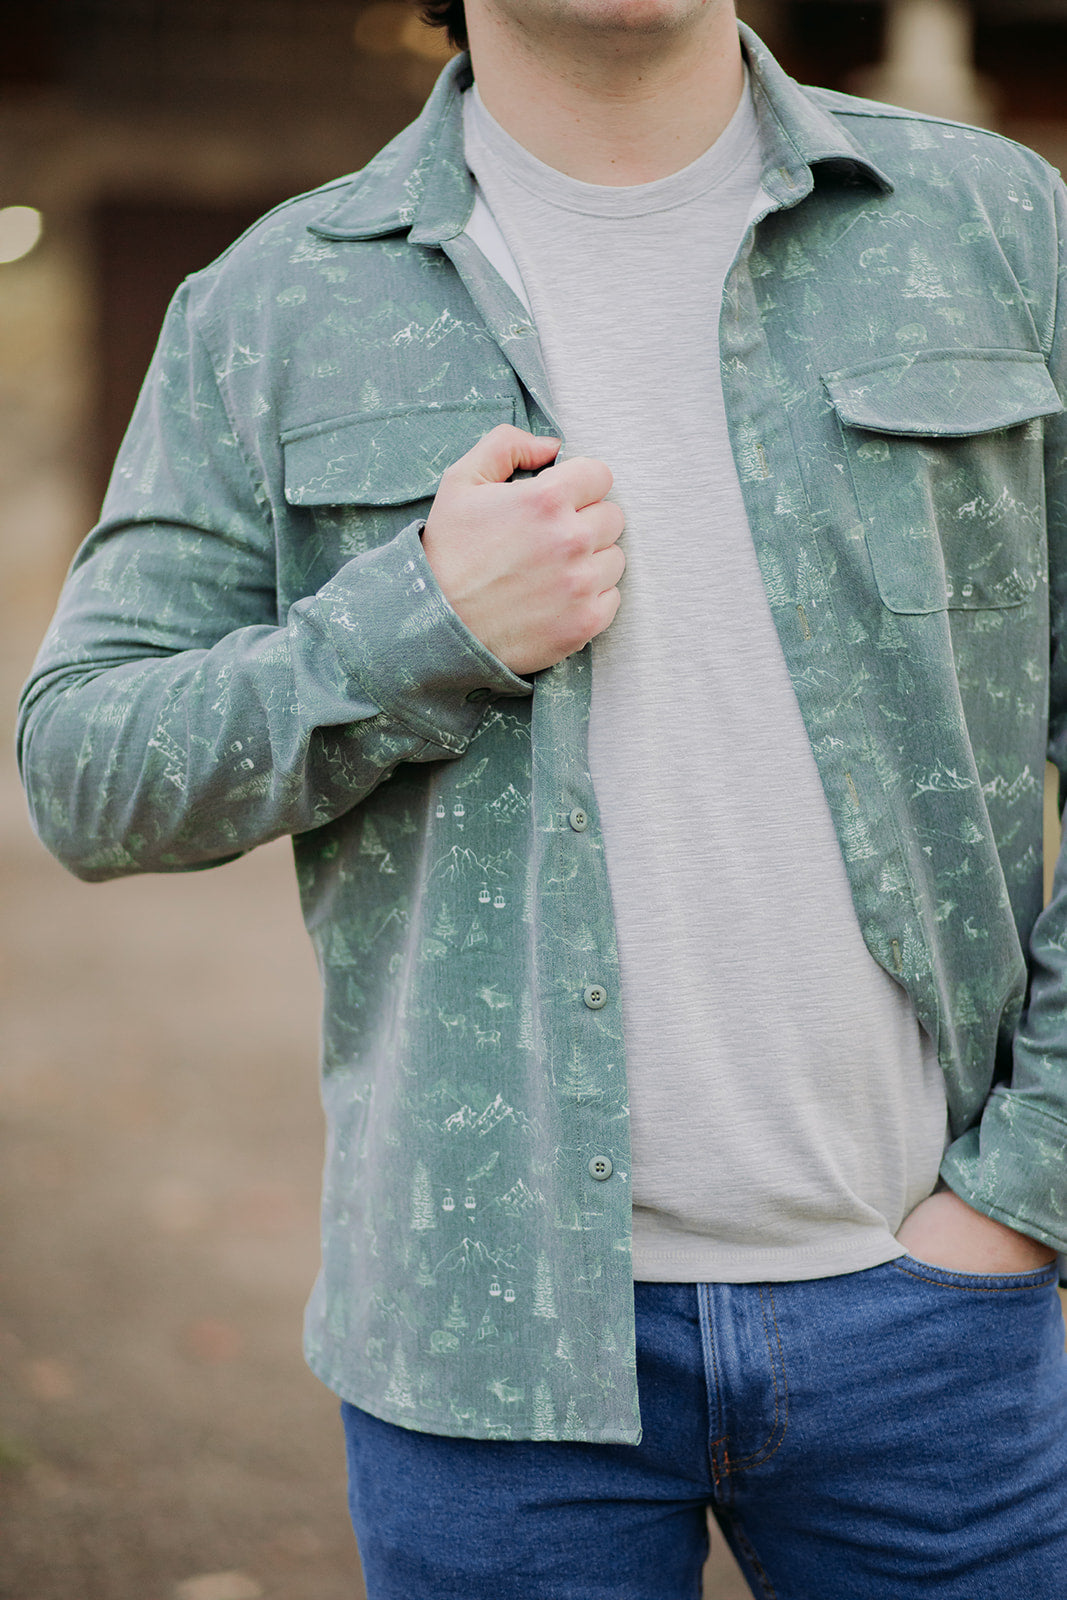 Mens Long Sleeve Button Down